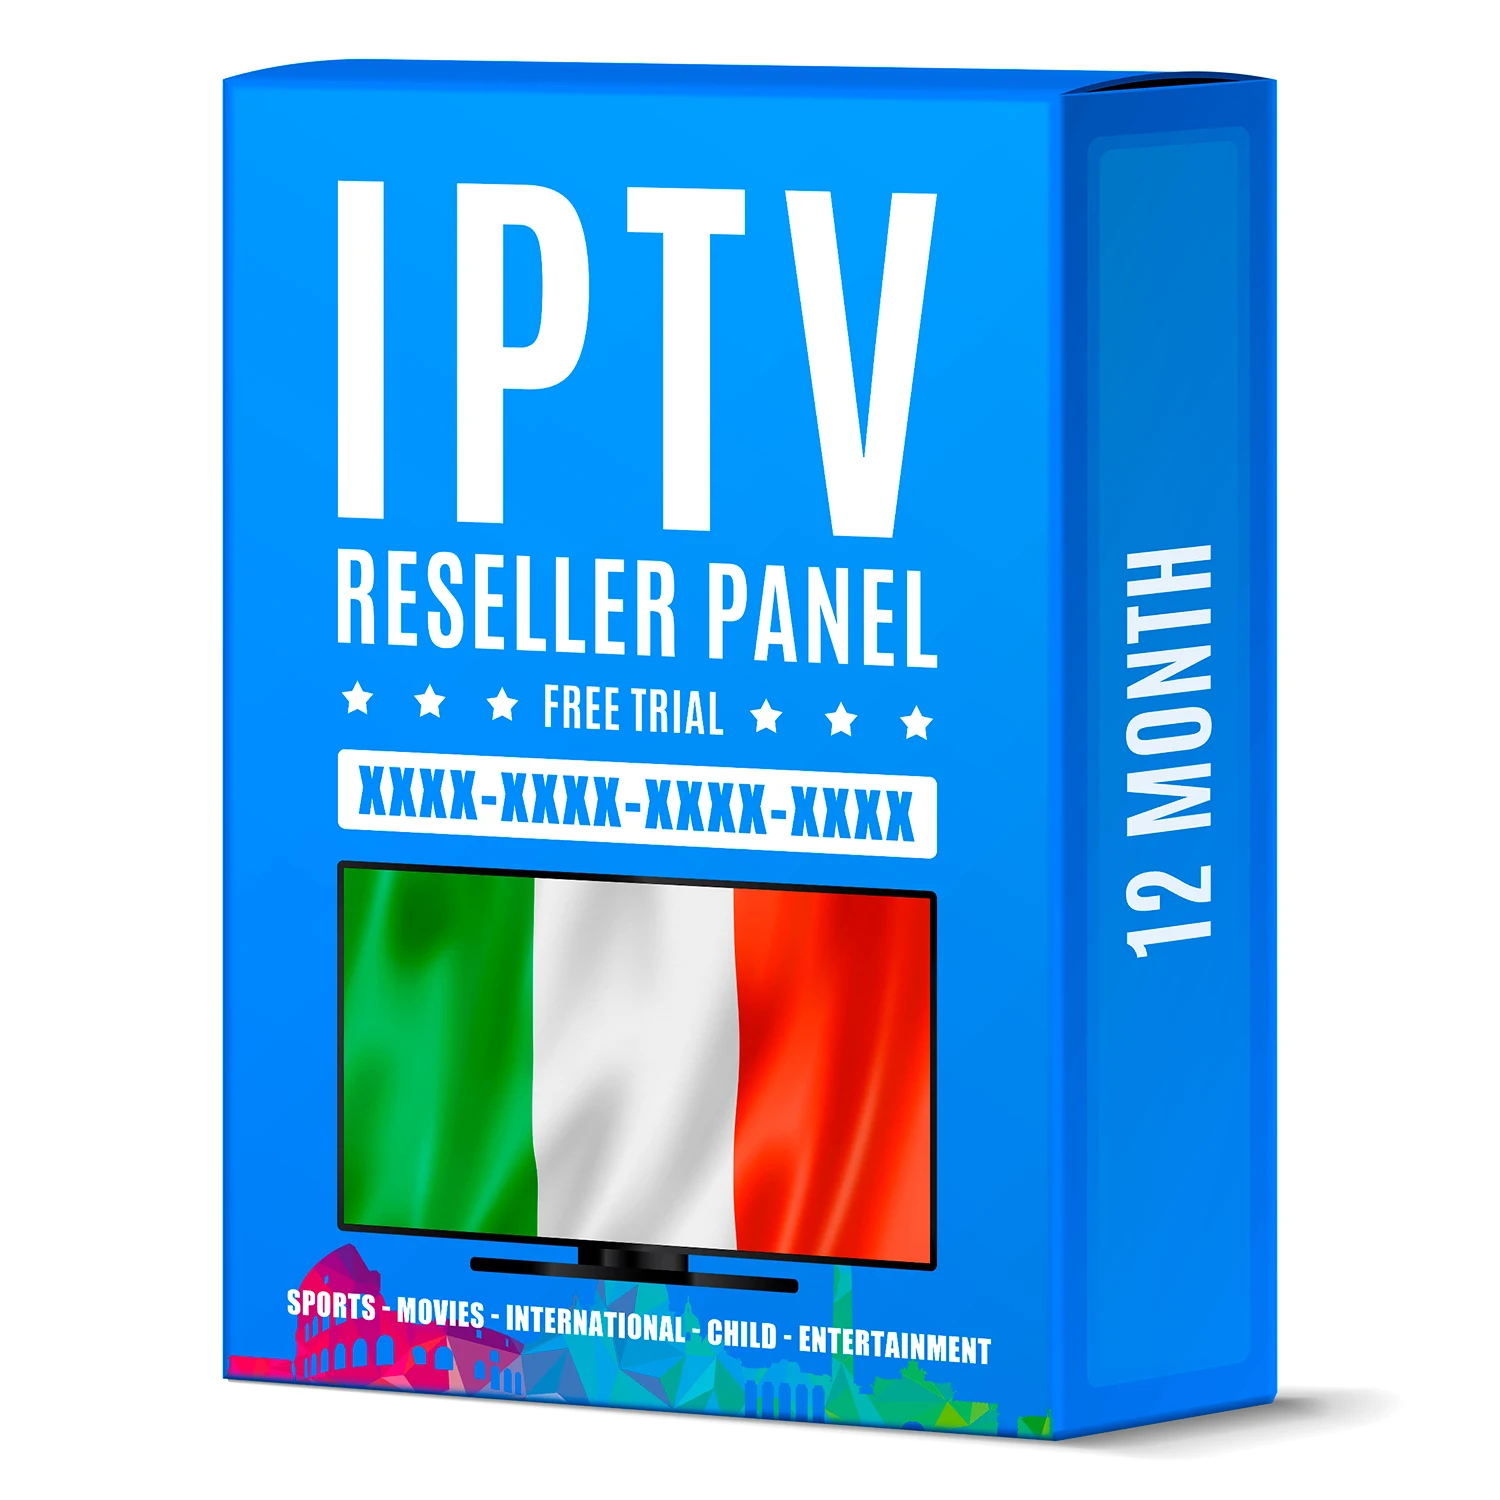 

Italy Europe 2021 Iptv XXX 12 Months Firestick Free Trial Android Tv Box Reseller Panel M3U Set Top Box Code Iptv Subscription